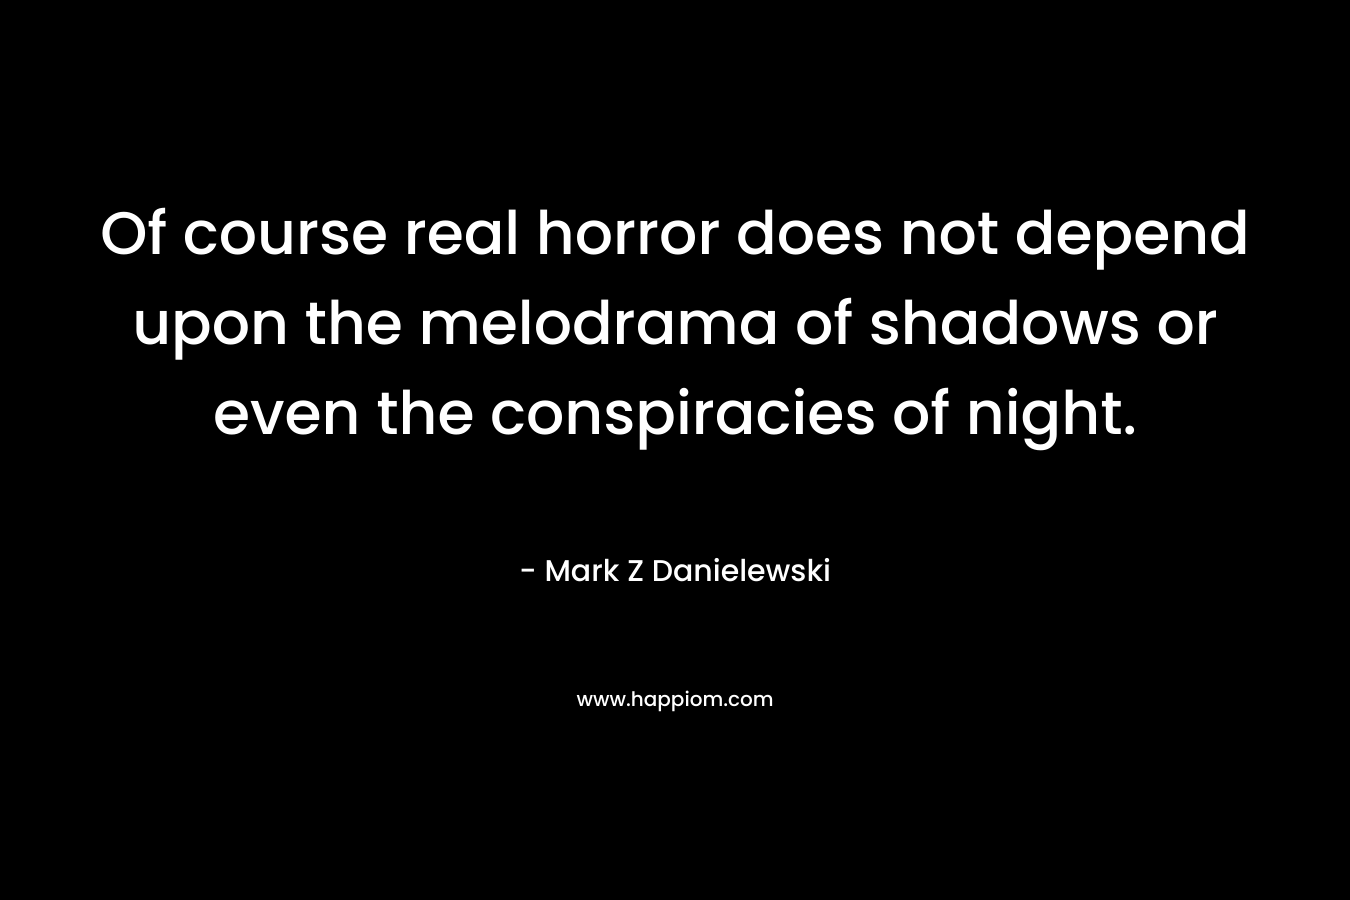 Of course real horror does not depend upon the melodrama of shadows or even the conspiracies of night. – Mark Z Danielewski